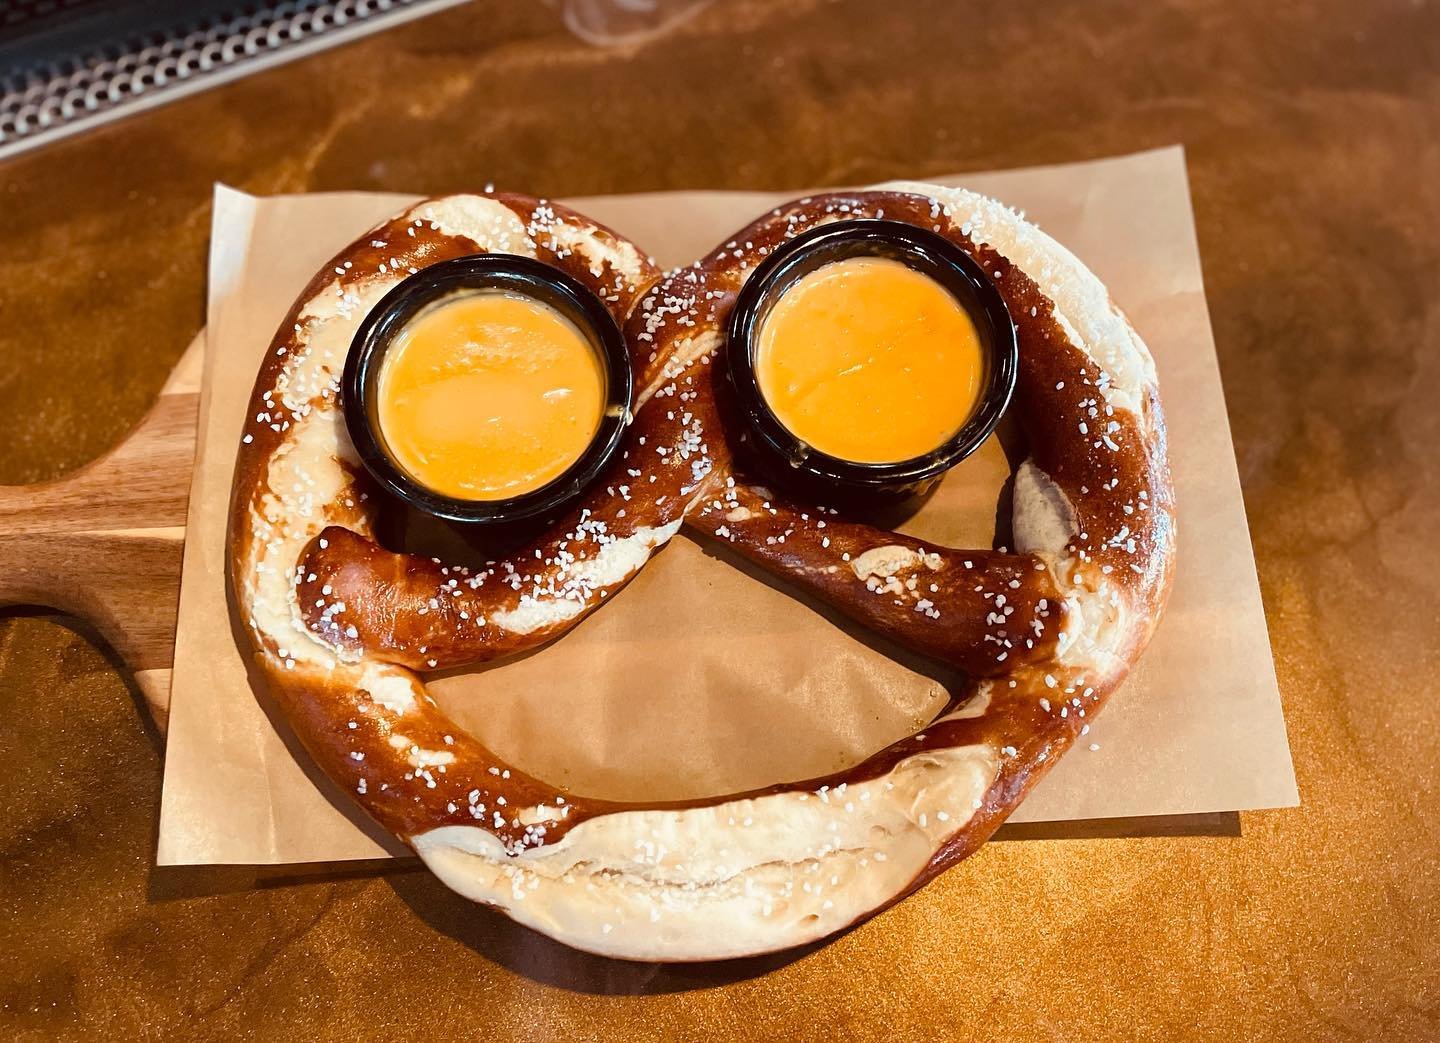 Our Happy Bavarian Pretzel with Beer Cheese Sauce. Come on in and and wash one down with one of our tasty craft cocktails. 🍸 We&rsquo;re open until 10 tonight, and from 2-7pm on Sunday. 
&hellip;
3610Bridgeport Way W
Univ. Place, WA 98466
&hellip;
#